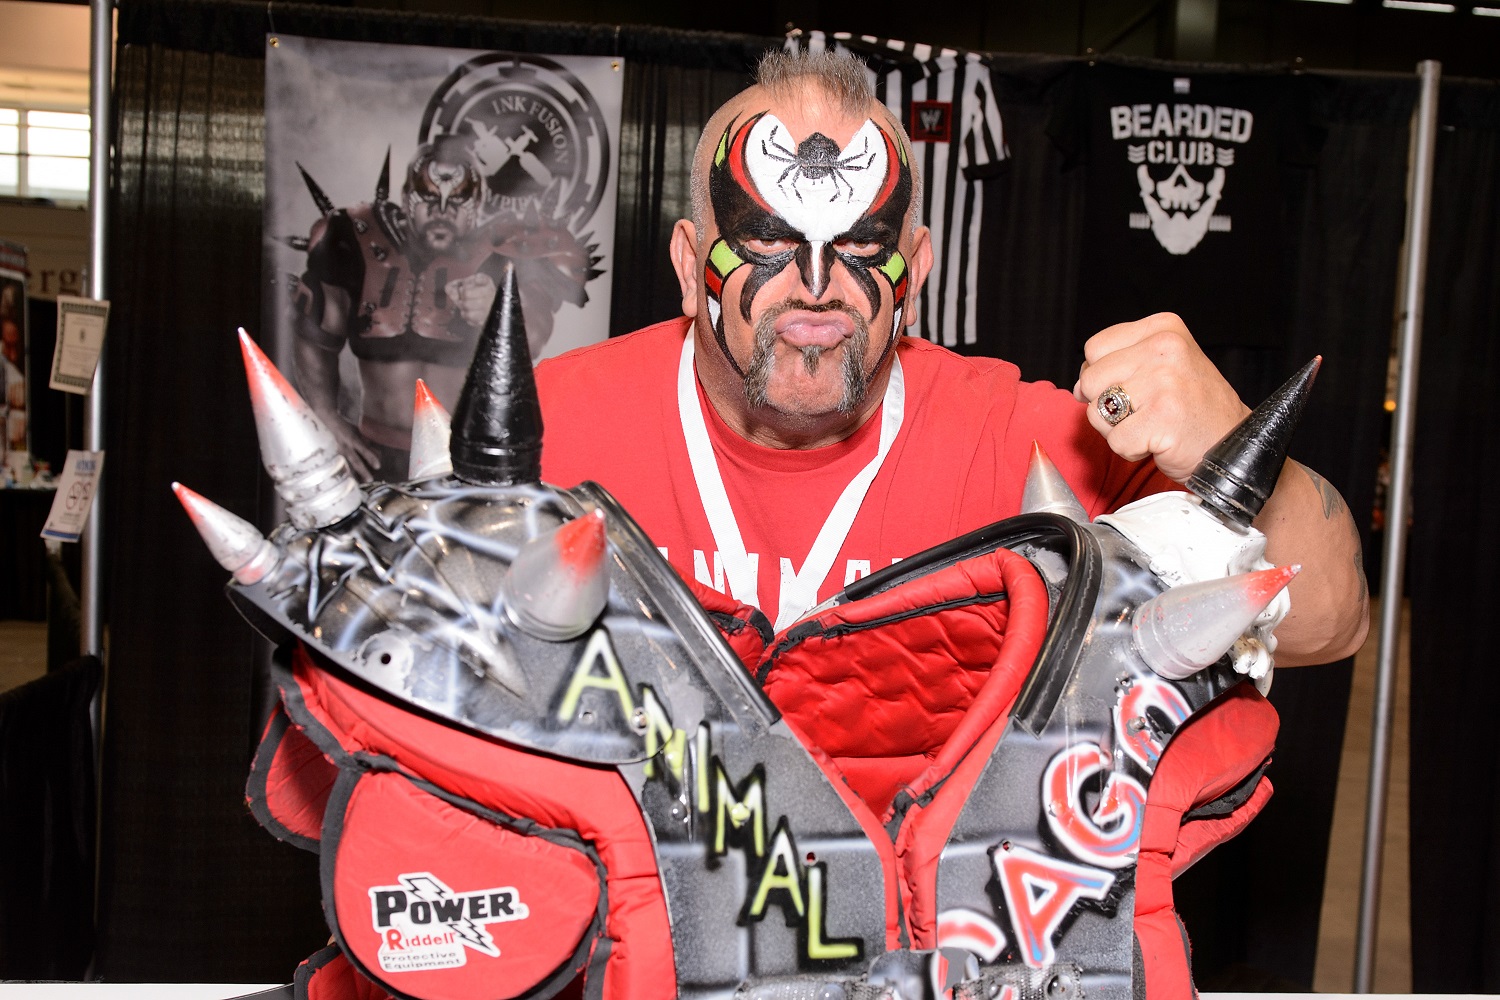 Road Warrior Animal Initially Wasn’t Fond of the Gimmick That Helped Him Become a Pro Wrestling Icon